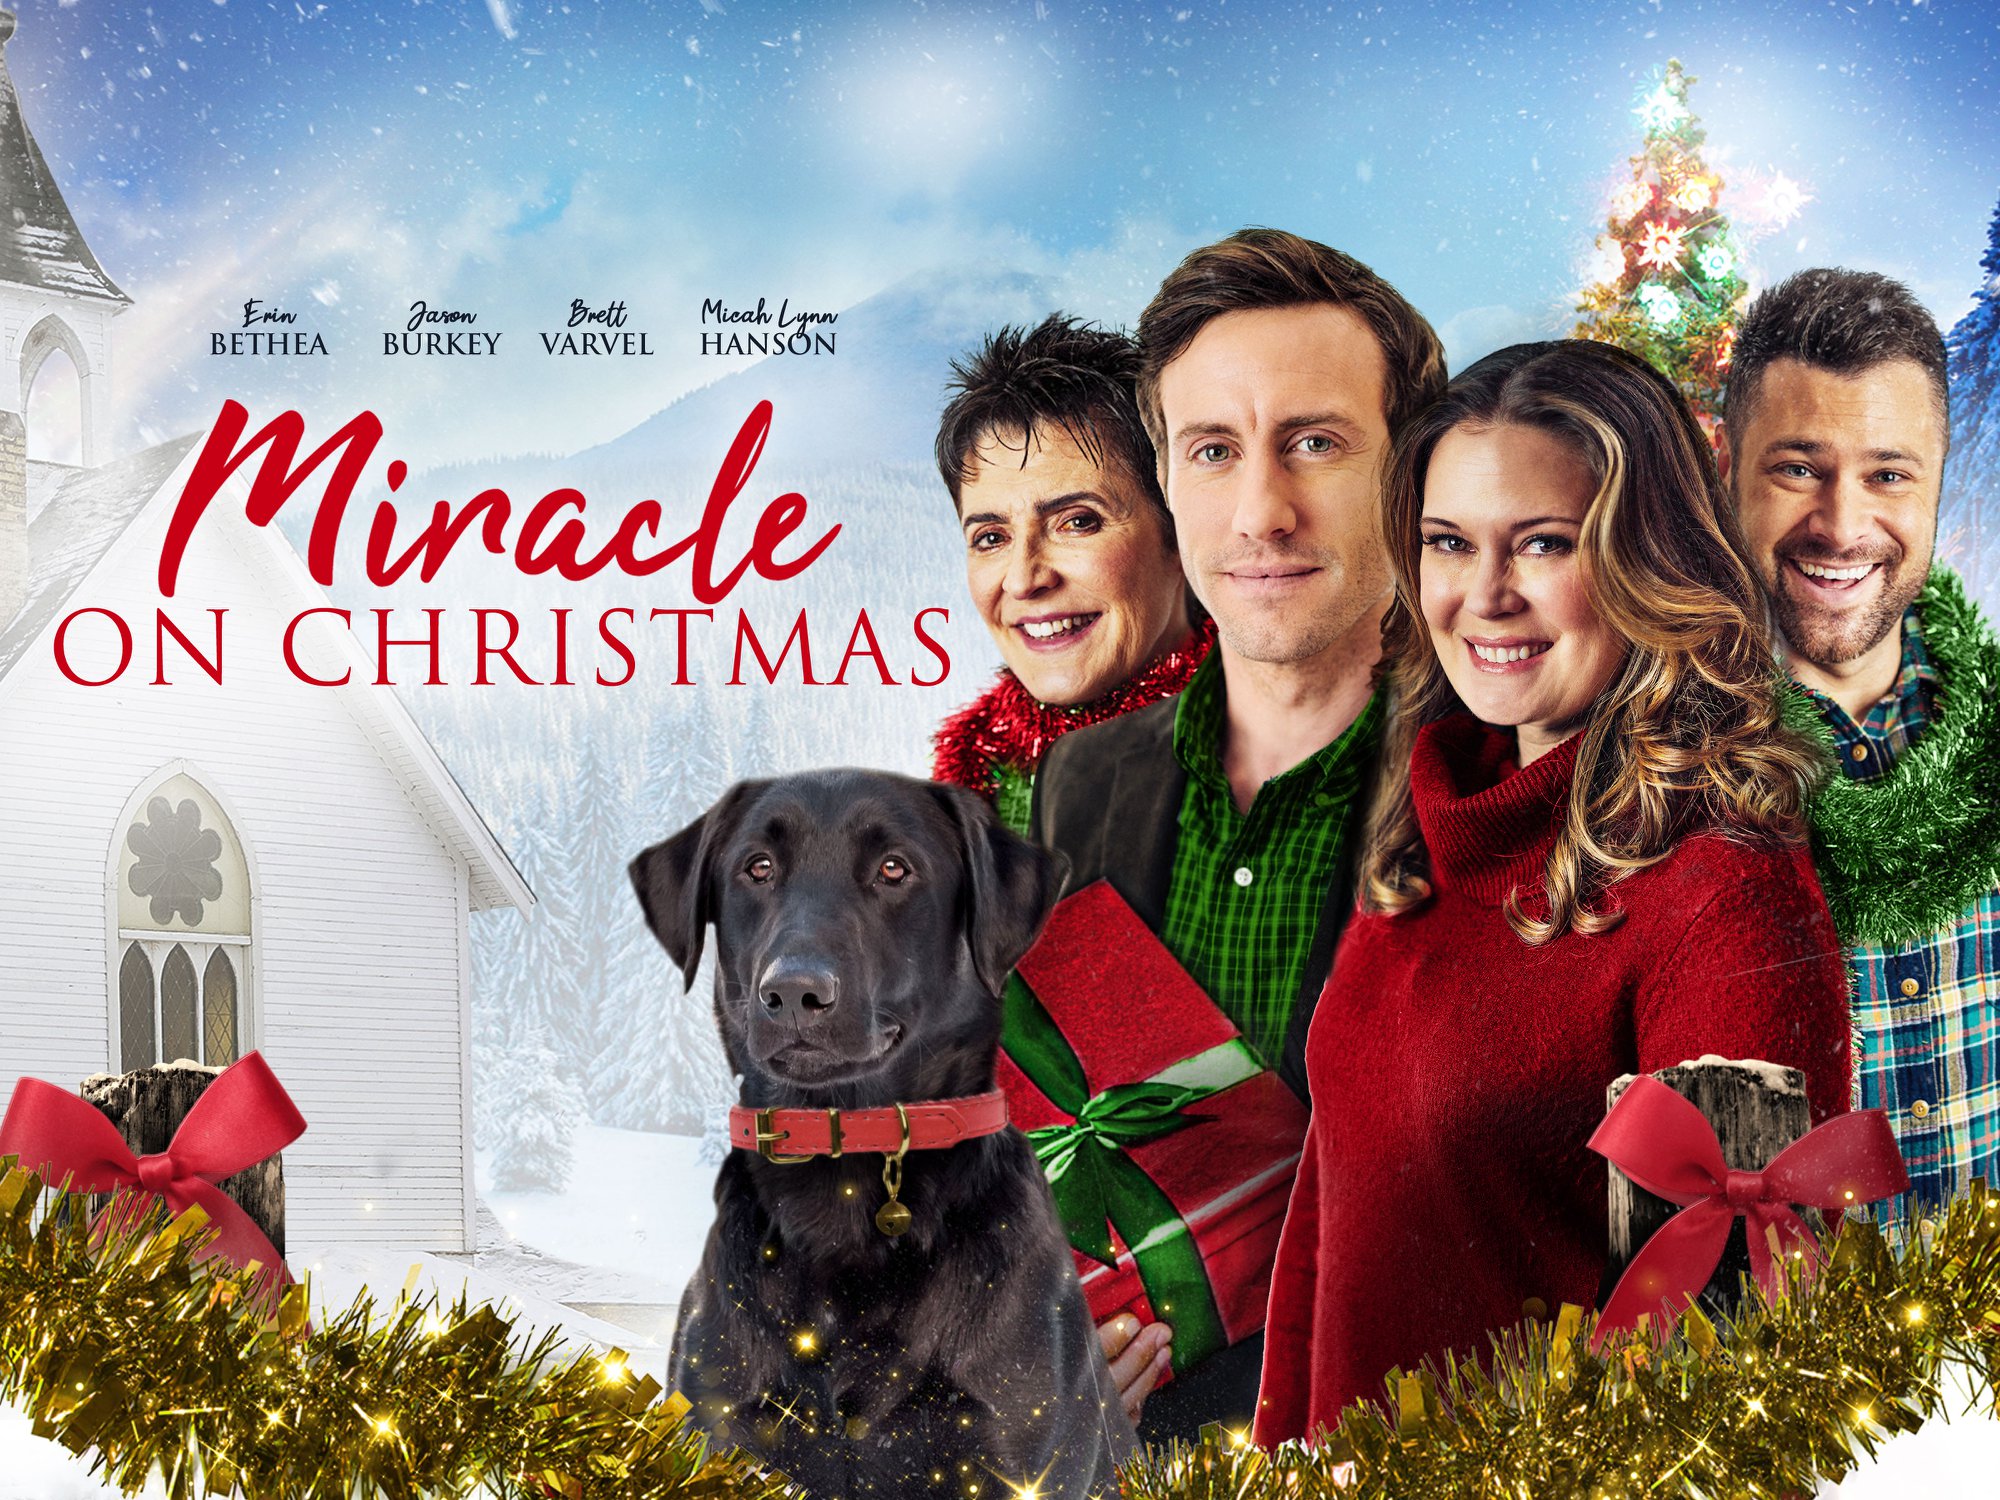 MIRACLE ON CHRISTMAS reminds us of the real meaning of Christmas and